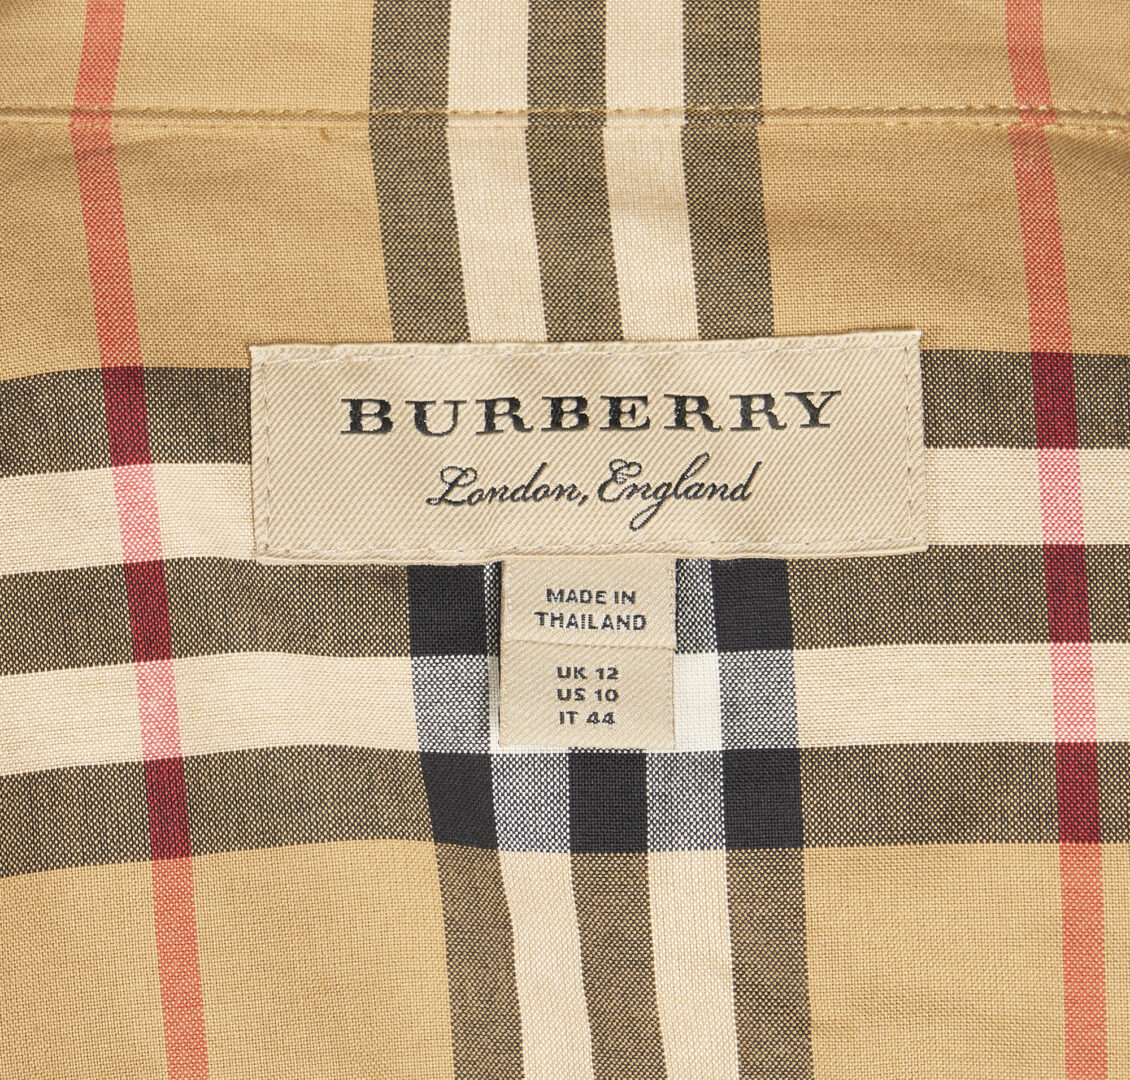 Lot 1239: 2 Burberry Leisure Outfits, 4 pcs